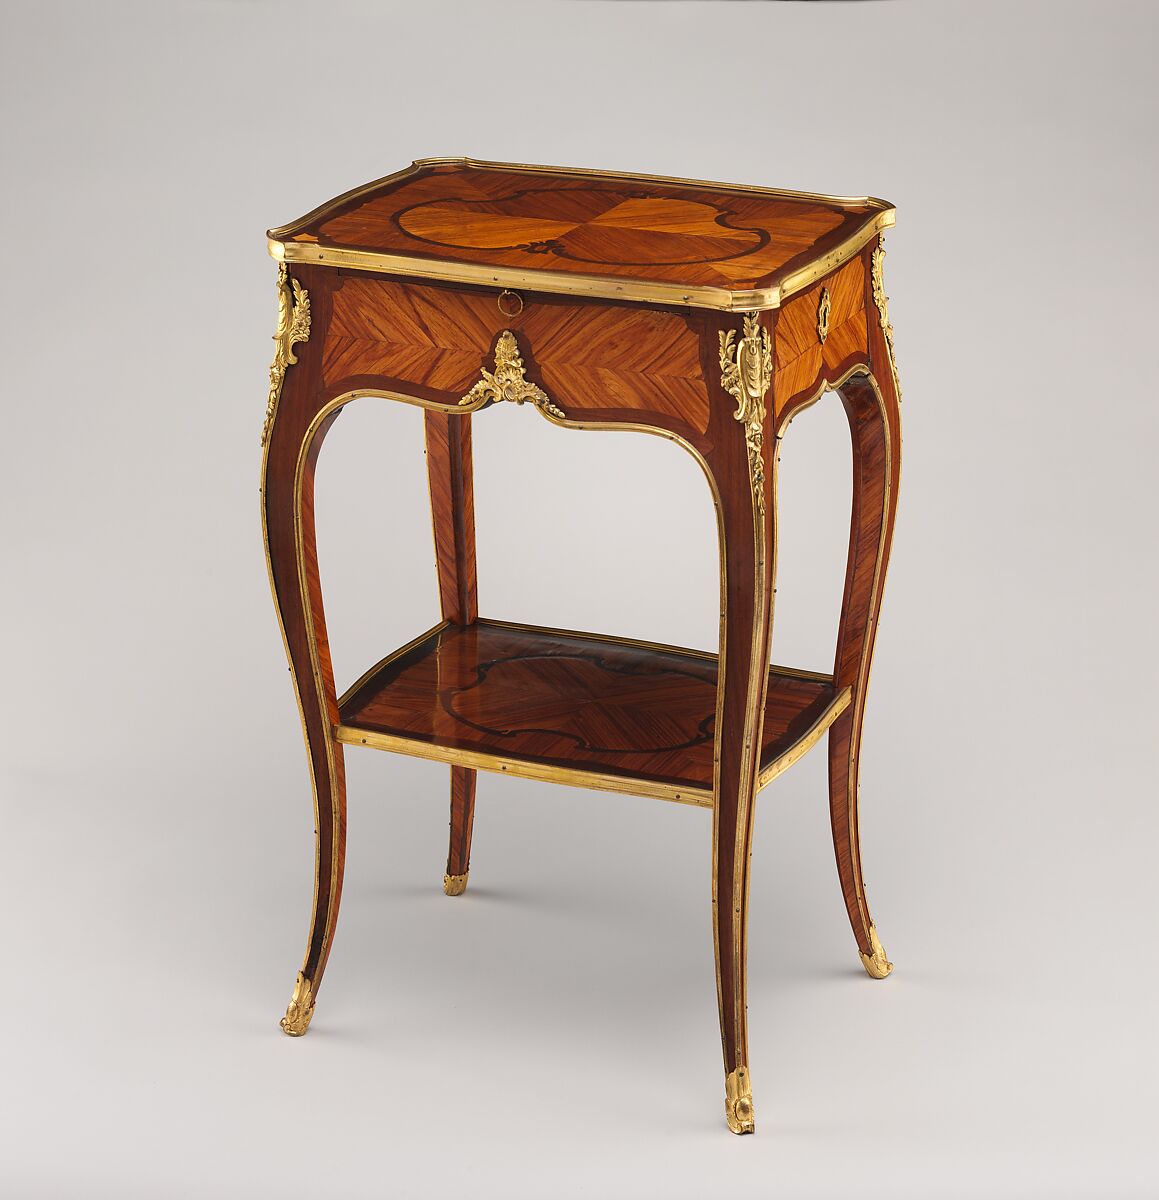 Small writing table, Antoine-Mathieu Criaerd (French, 1724–1787), Oak veneered with tulipwood and amaranth, gilt bronze, leather, French, Paris 